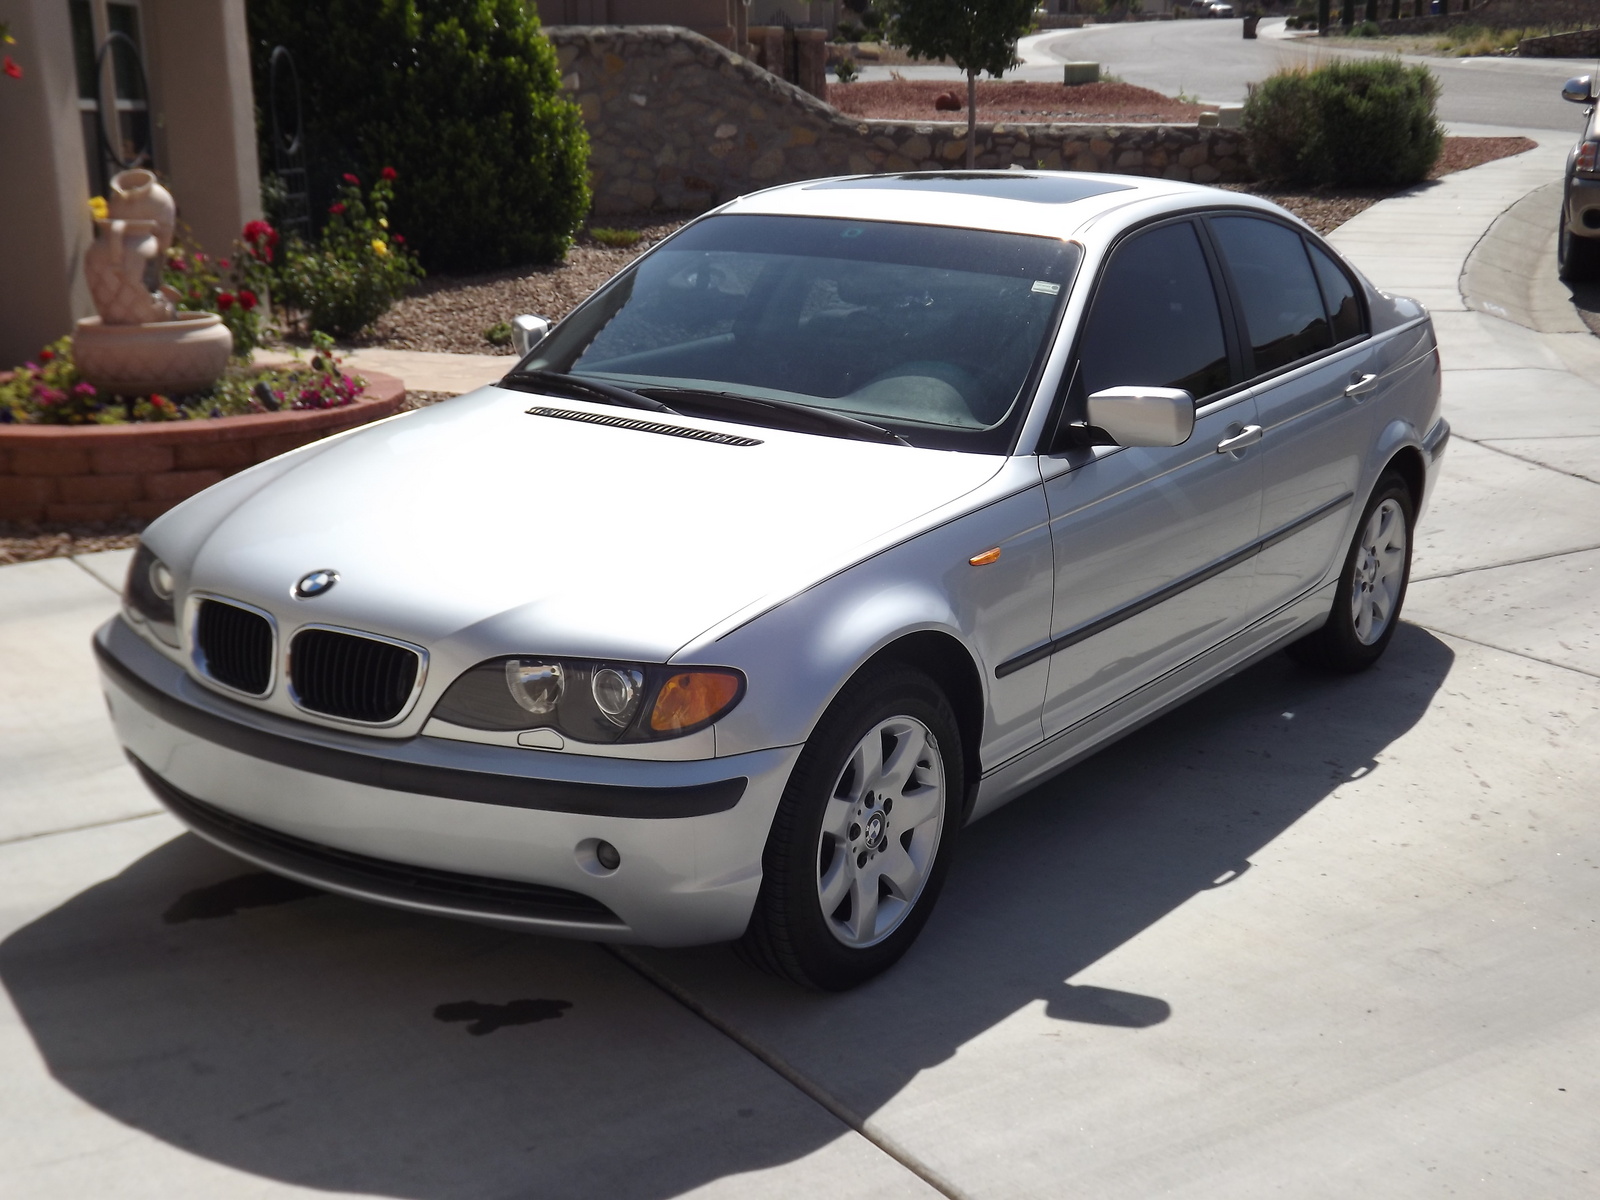 2002 Bmw 325xi safety rating #7